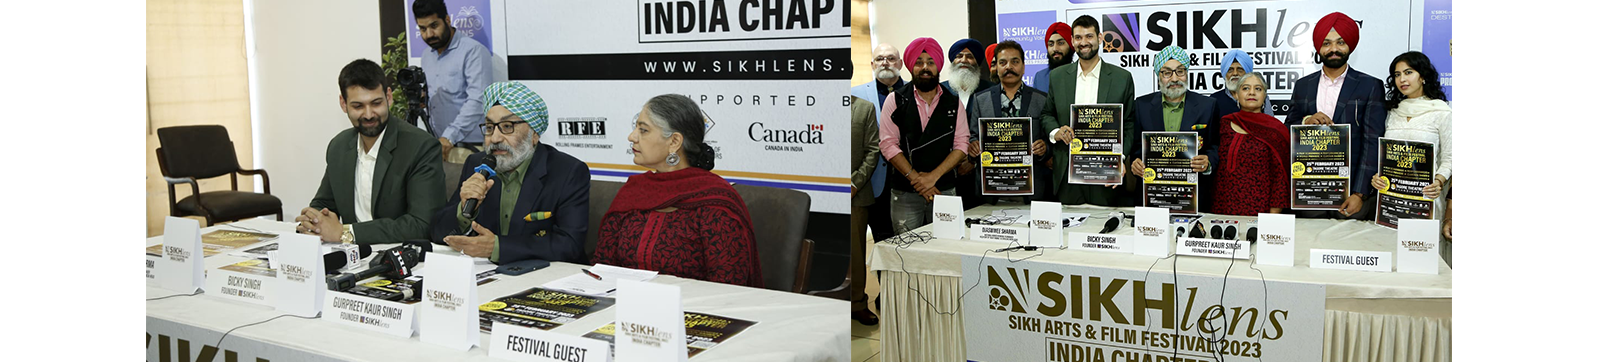 Sikh Arts & Film Festival, SIKHlens, Offers a peep into Sikh history